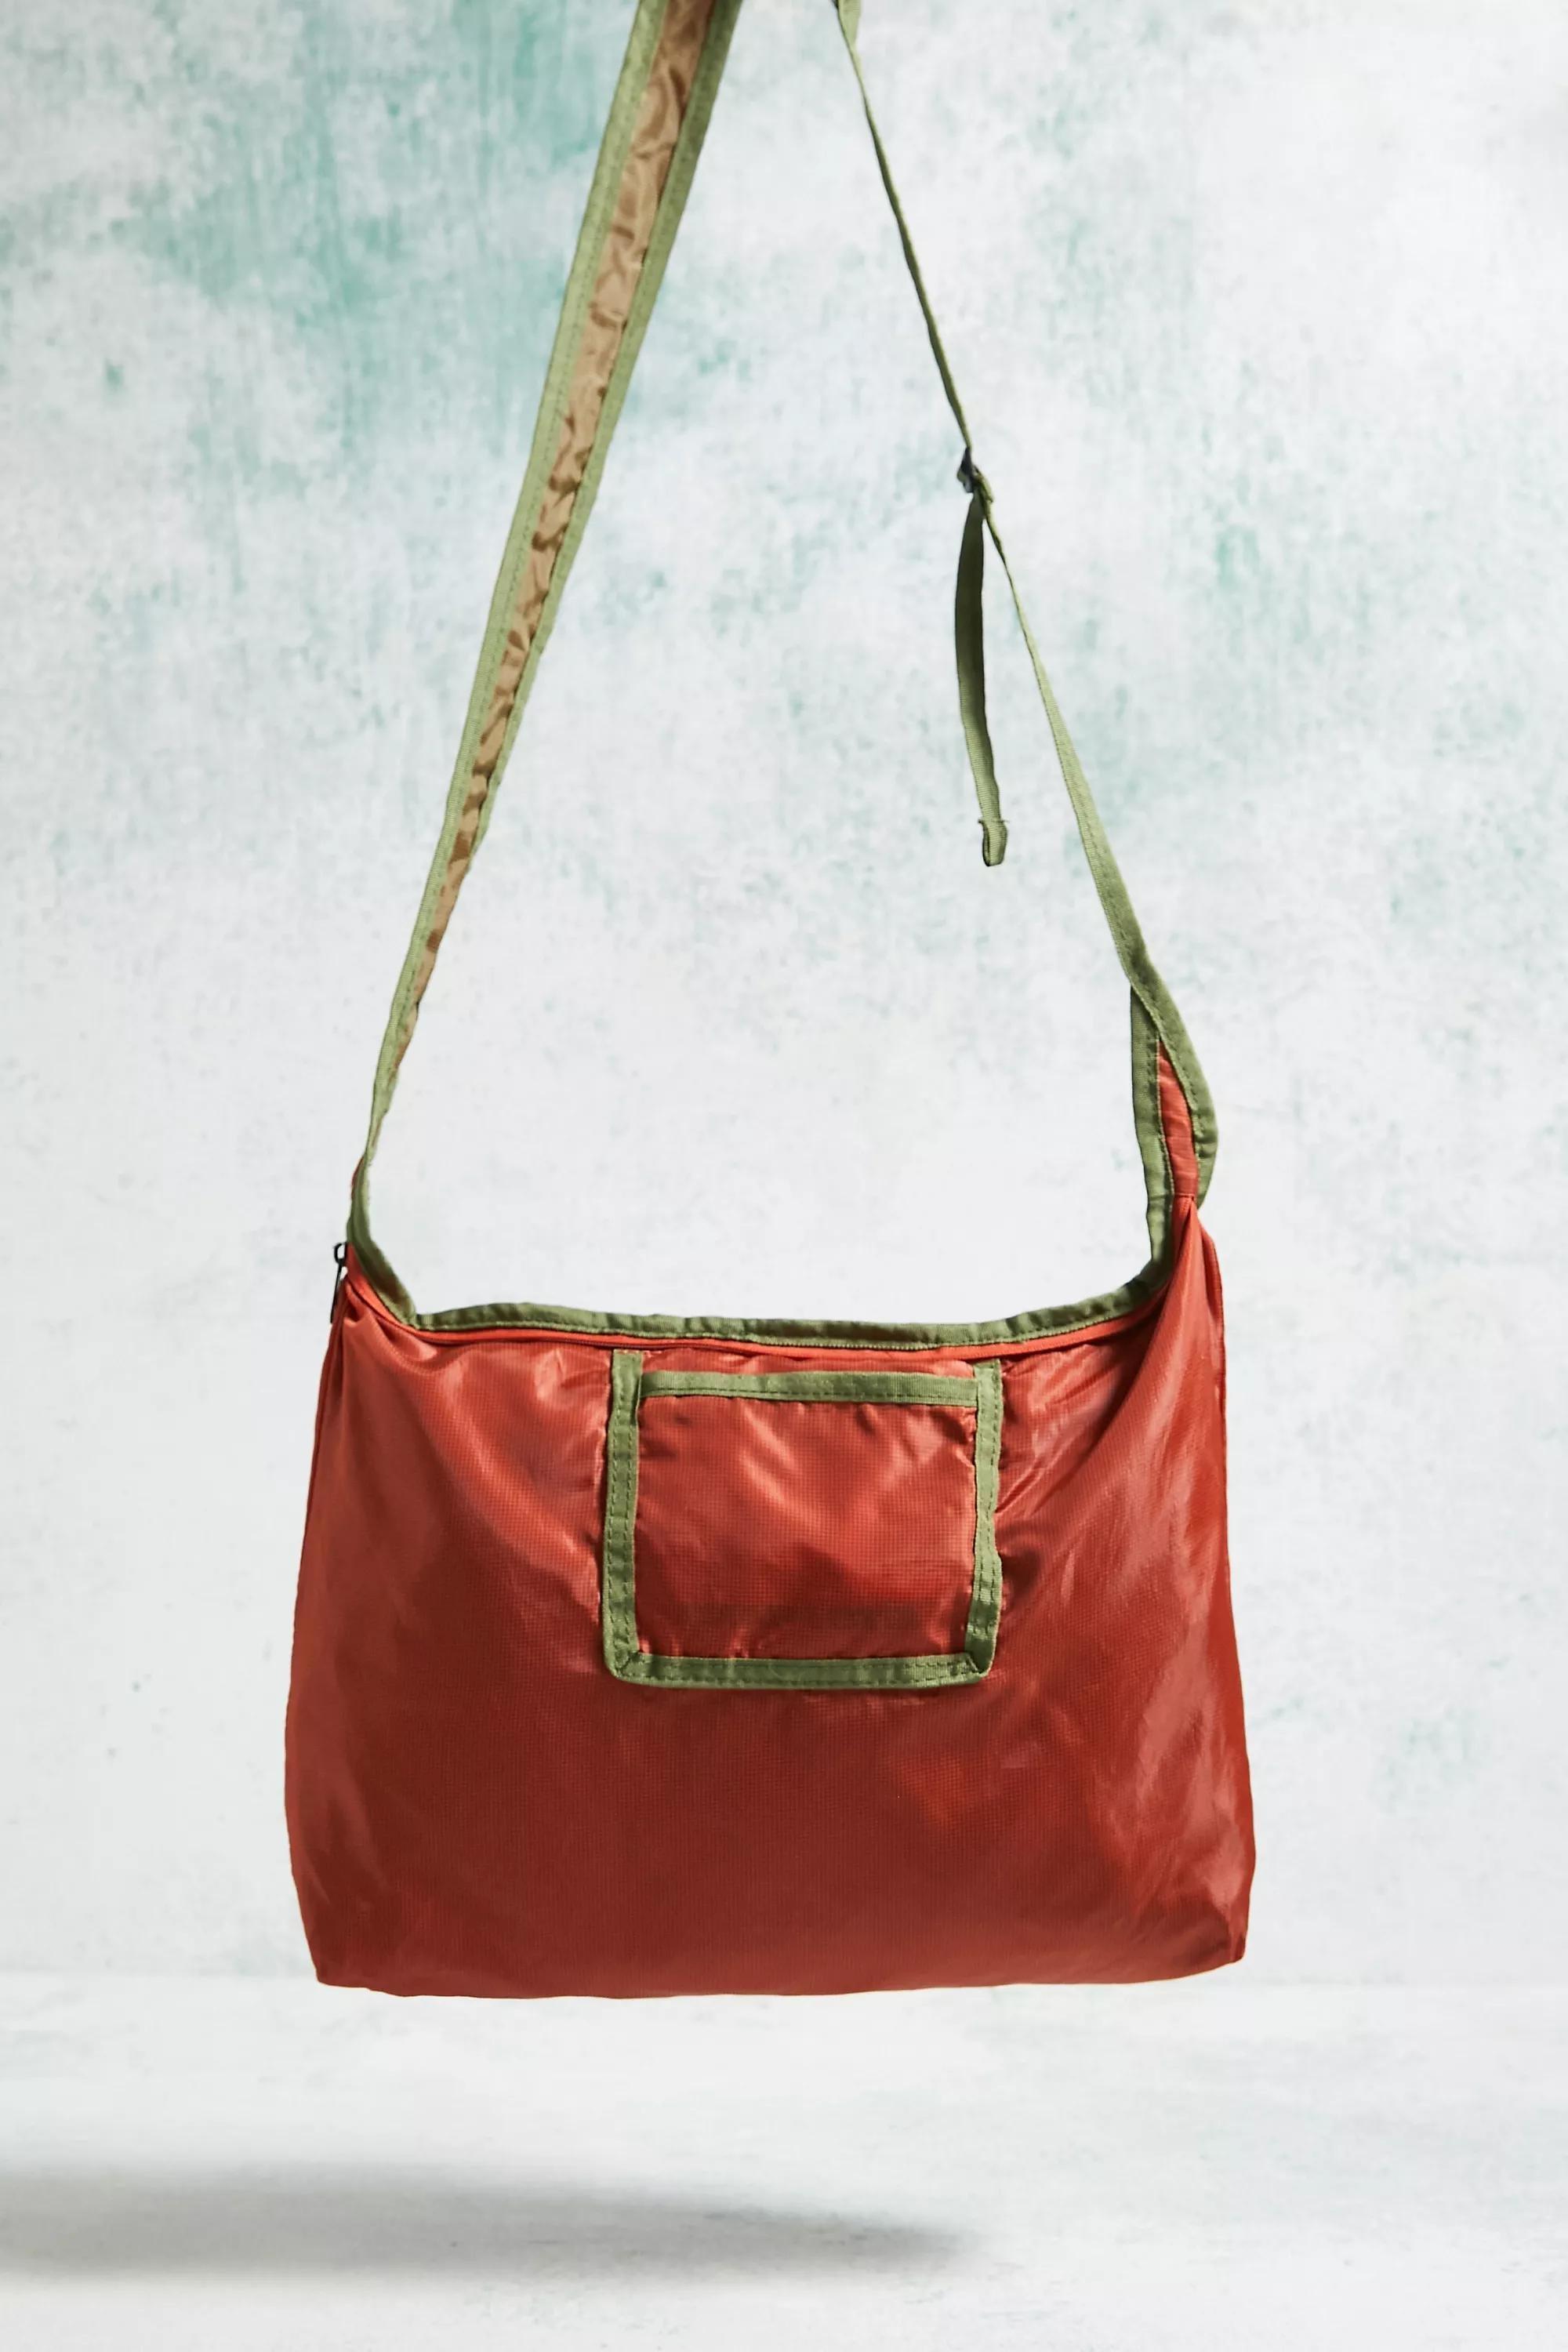 Urban Outfitters - Green Iets Frans... Reversible Crossbody Bag